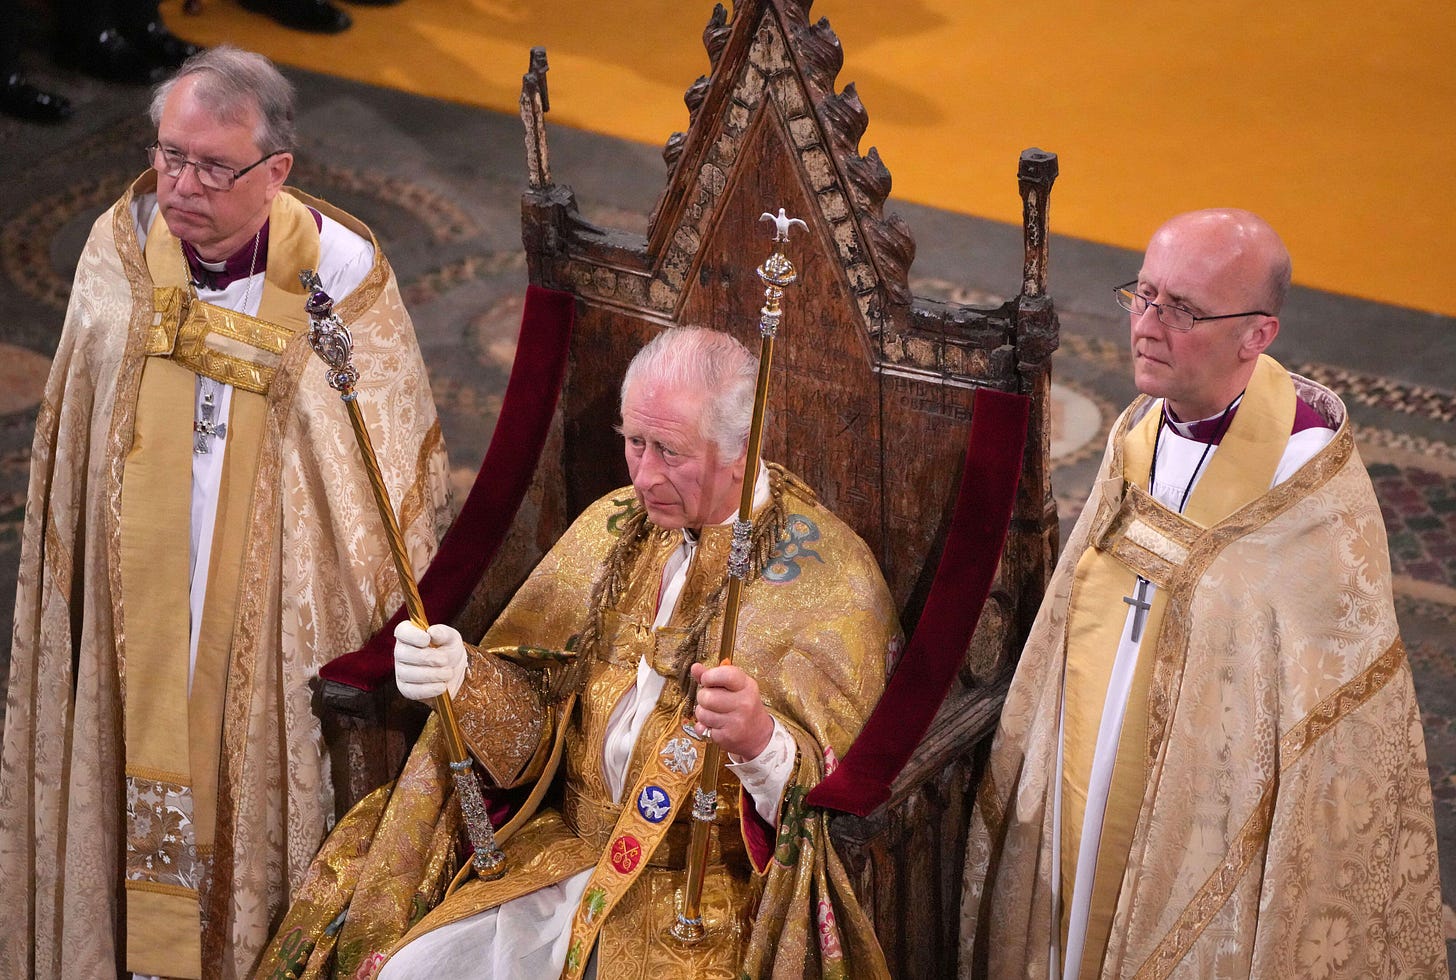 Coronation of Kings Charles III on 6 May 2023. Charles is sitting in the center holding two scepters from the Crown Jewels and is flanked on either side by priests. Everyone is dressed in white and gold.